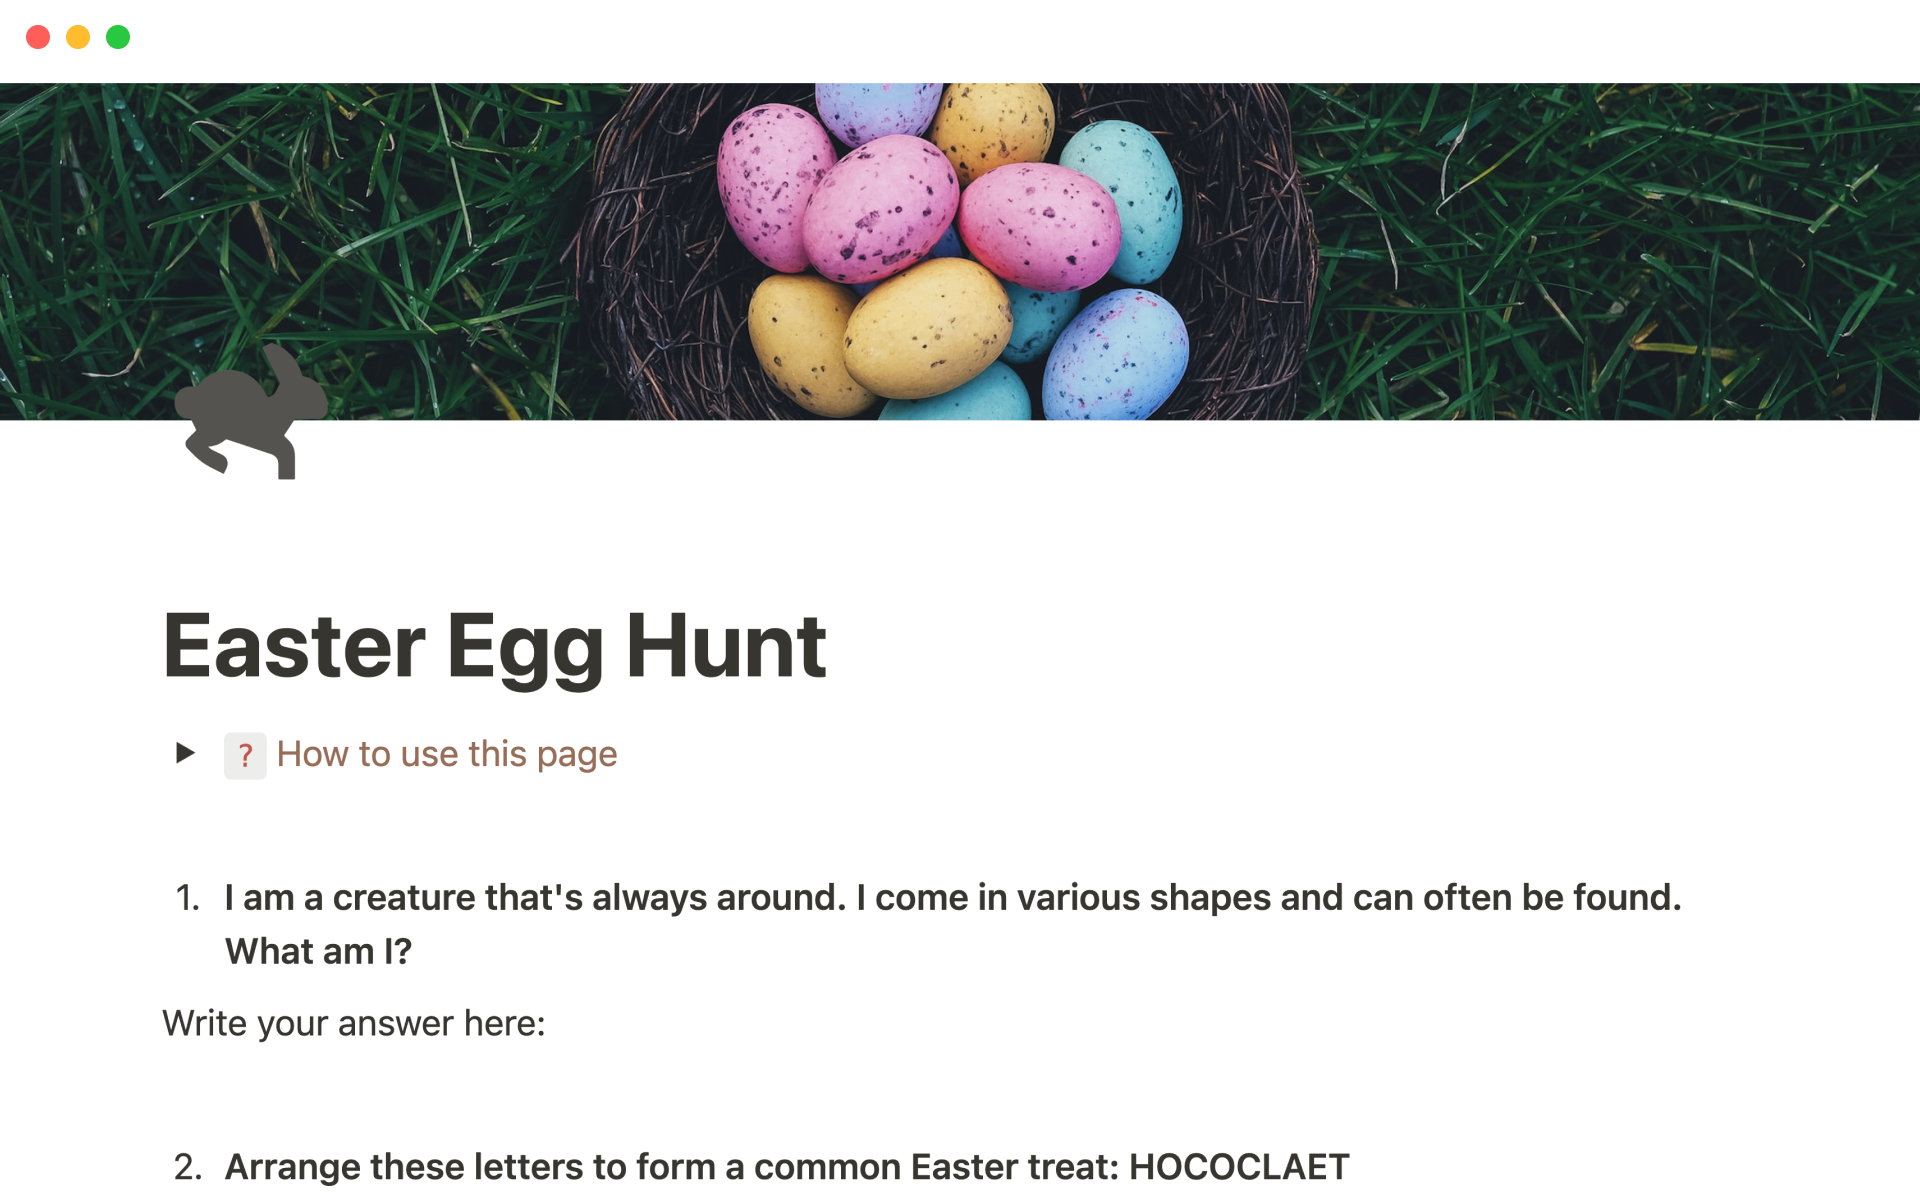 This egg-ceptional template offers a unique and engaging way to celebrate Easter while encouraging teamwork, problem-solving, and fun.